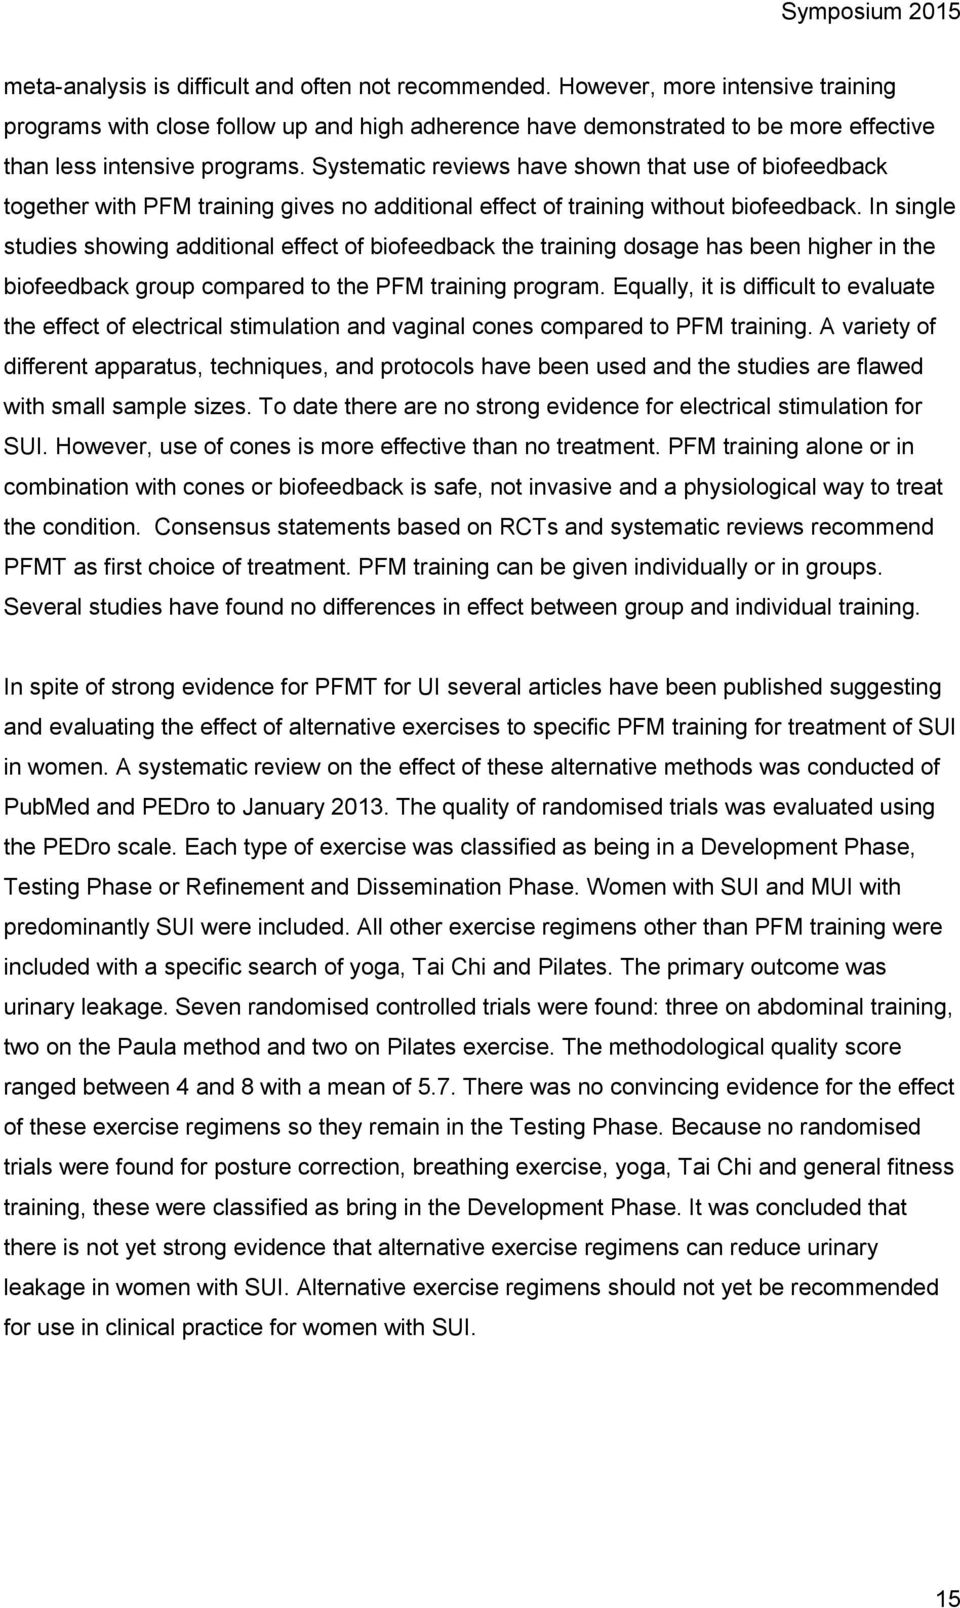 Systematic reviews have shown that use of biofeedback together with PFM training gives no additional effect of training without biofeedback.